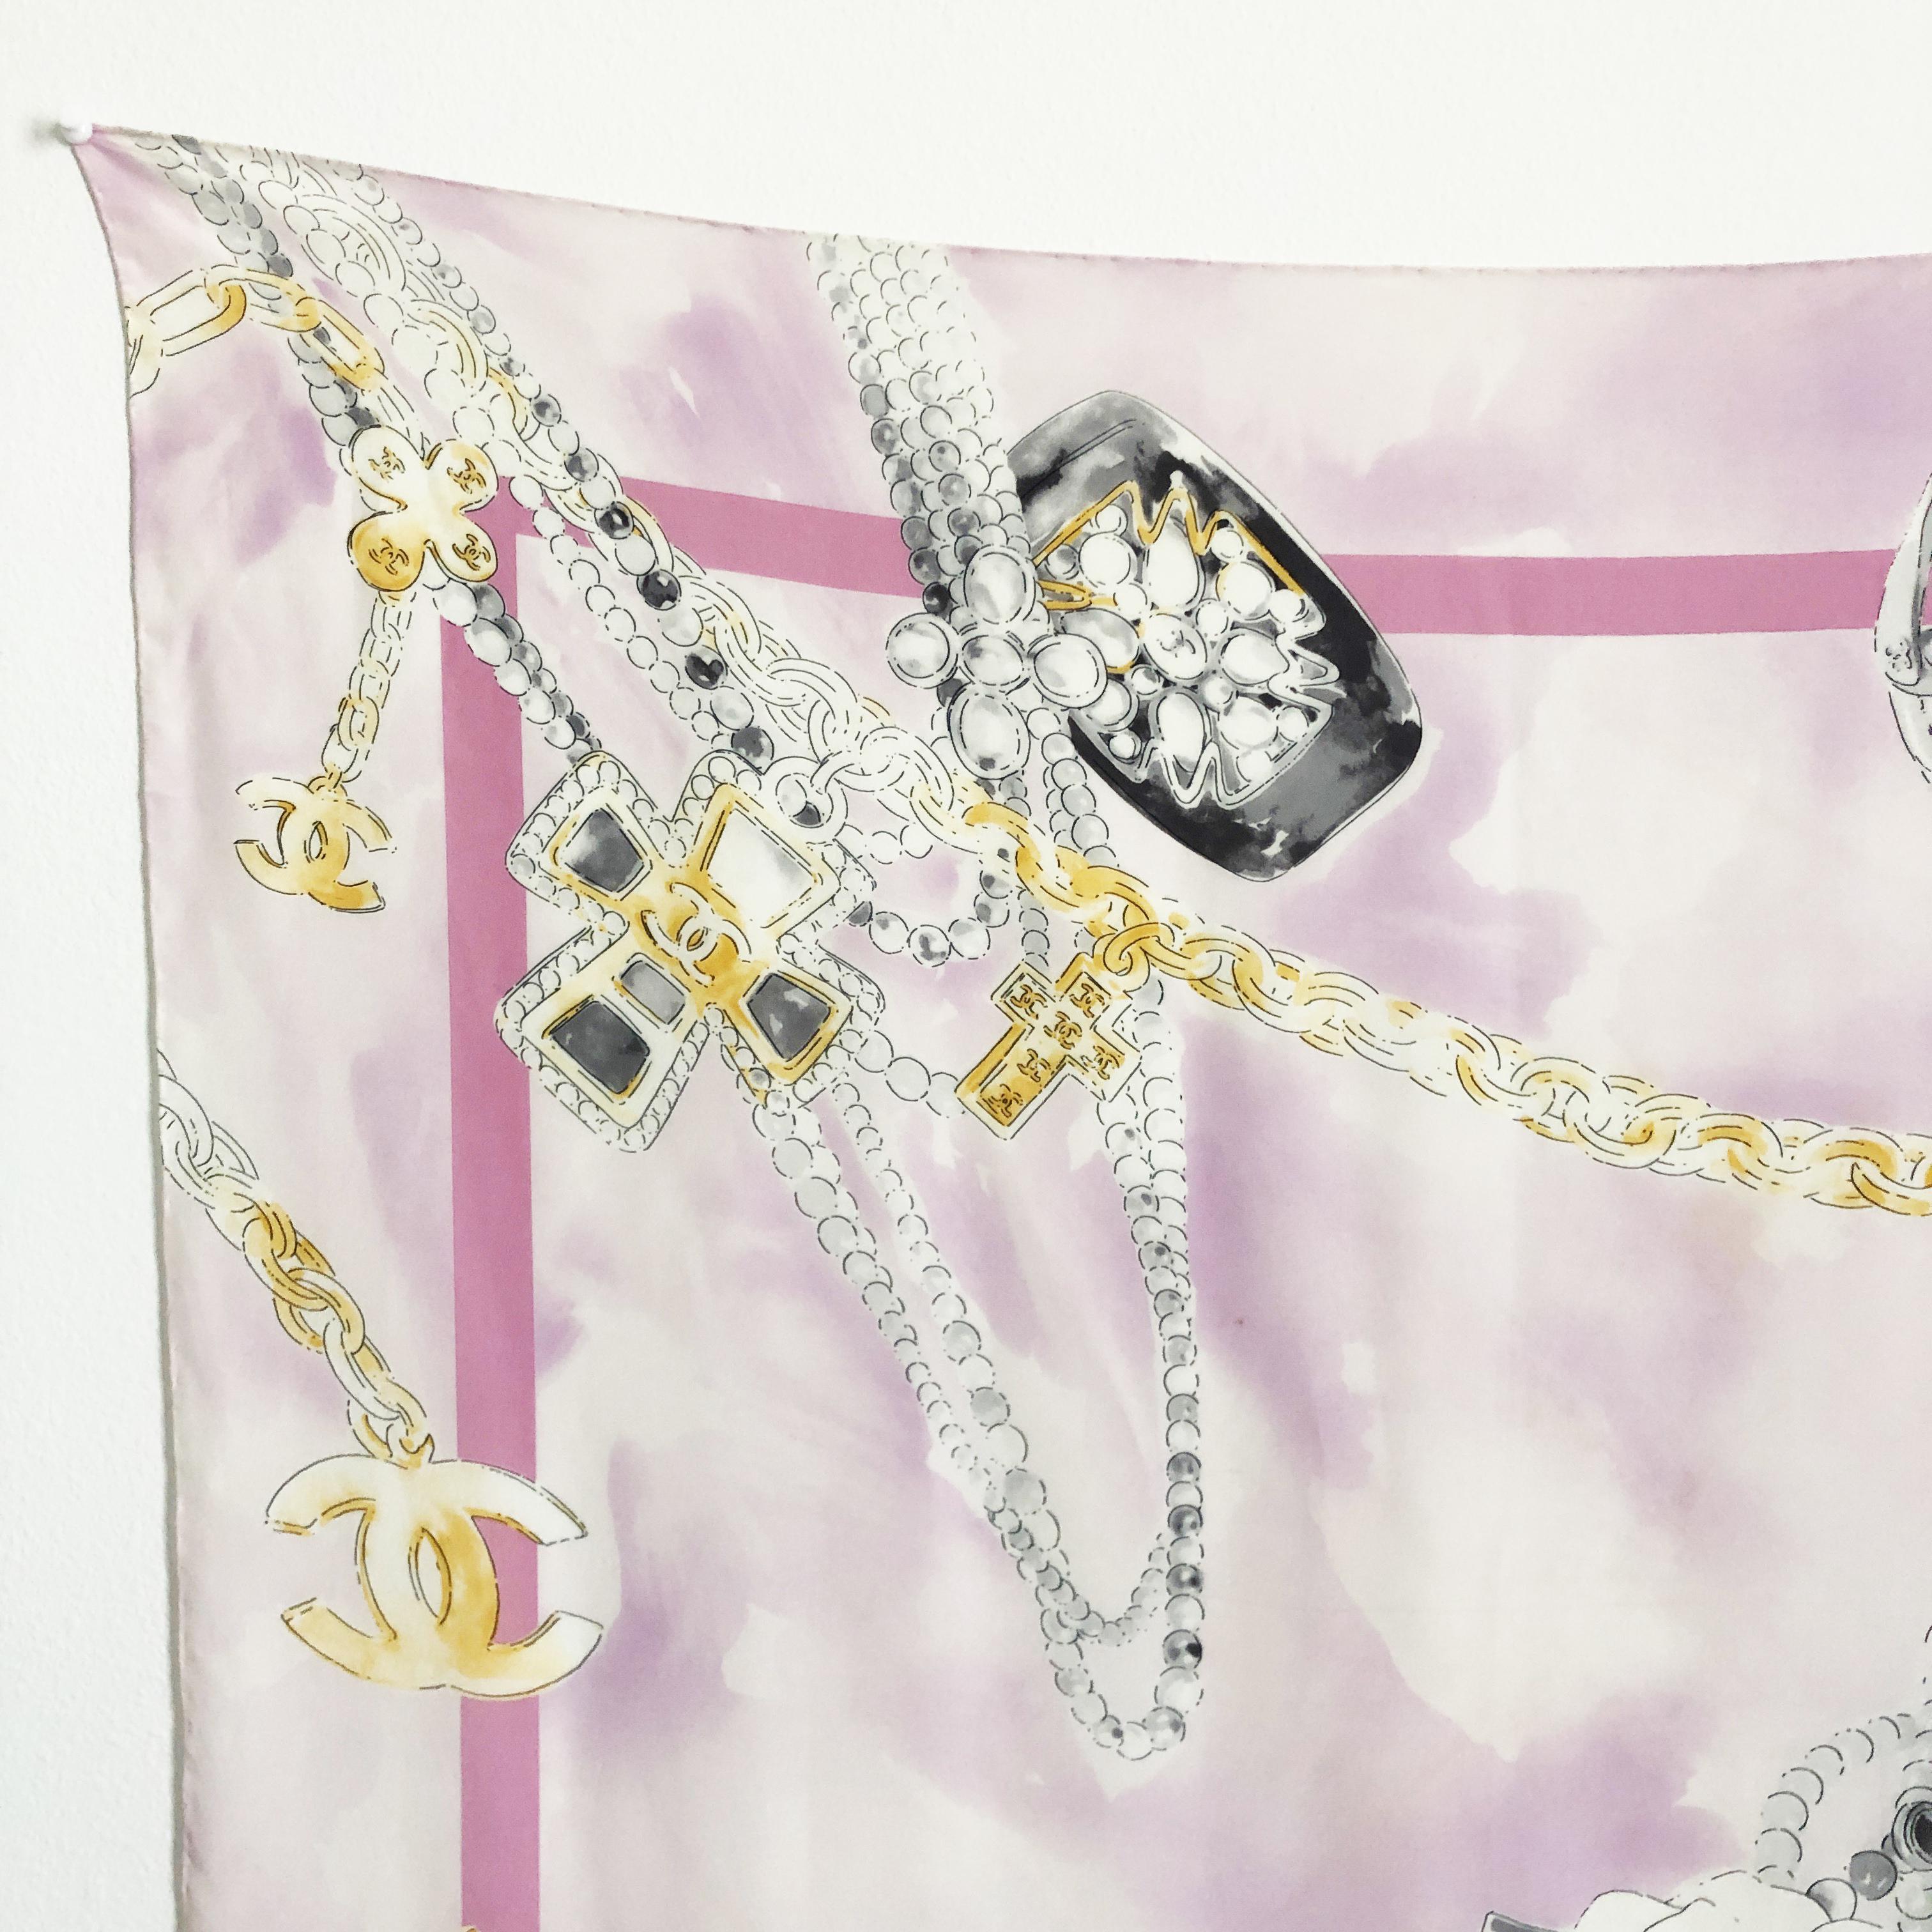 Authentic, preowned Chanel silk scarf or shawl with a bijoux or jewelry motif, likely made in the late 90s.  Made from silk, it features Chanel's iconic jewelry designs with chains, the CC logo, pearls and bracelets. 

Gorgeous colors on this one,